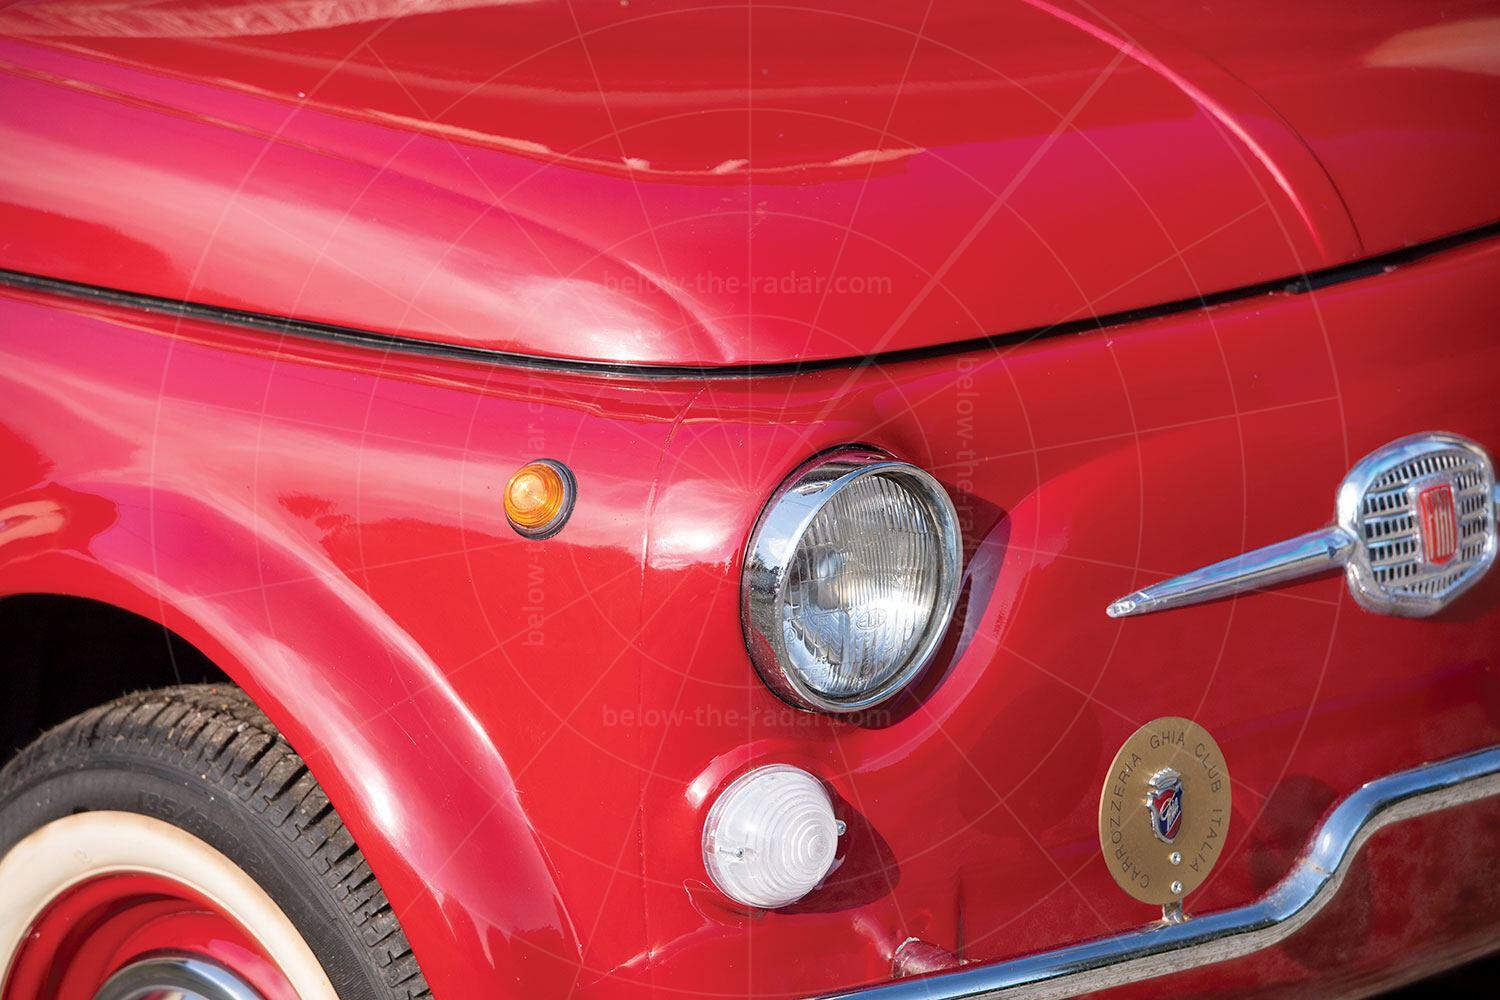 Fiat 500 Jolly Pic: RM Sotheby's | Fiat 500 Jolly